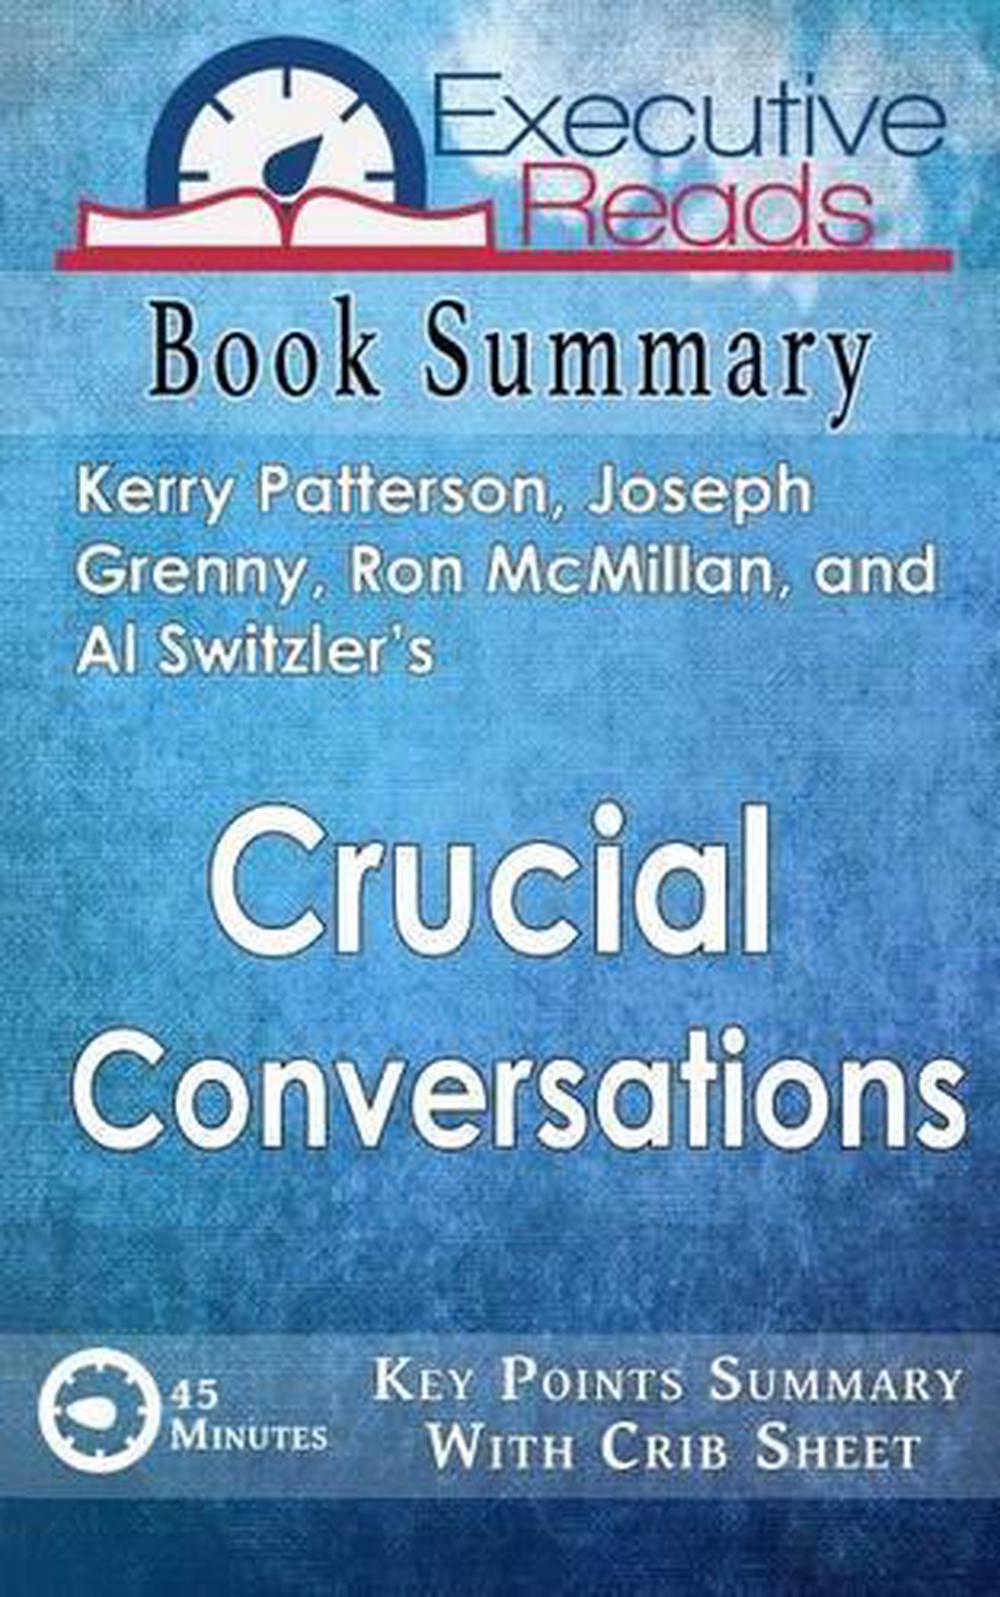 the book crucial conversations summary